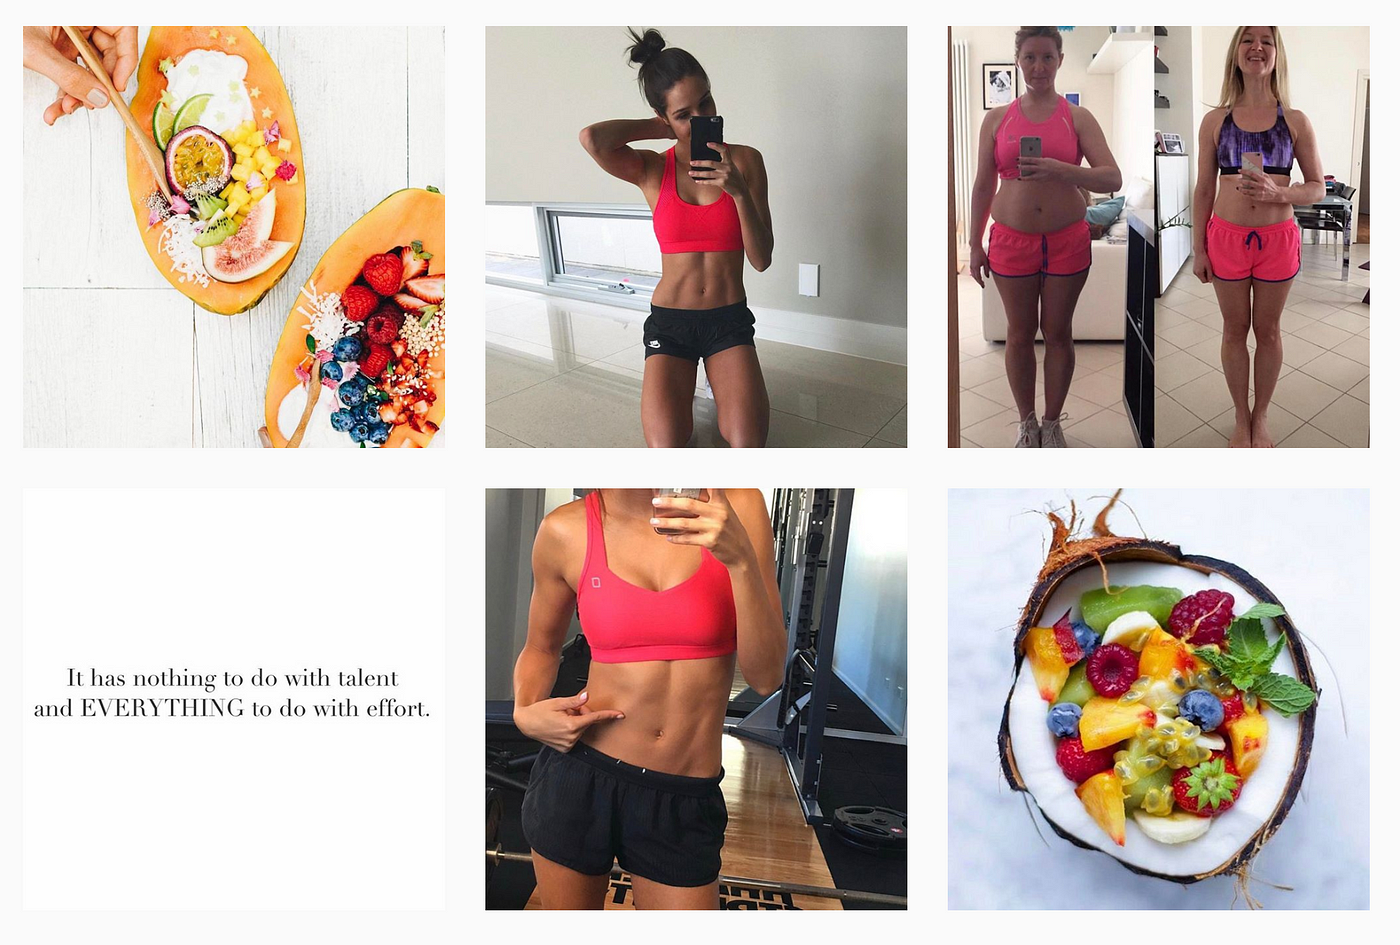 Kayla Itsines Is Winning Instagram Followers, One Ab Post at a